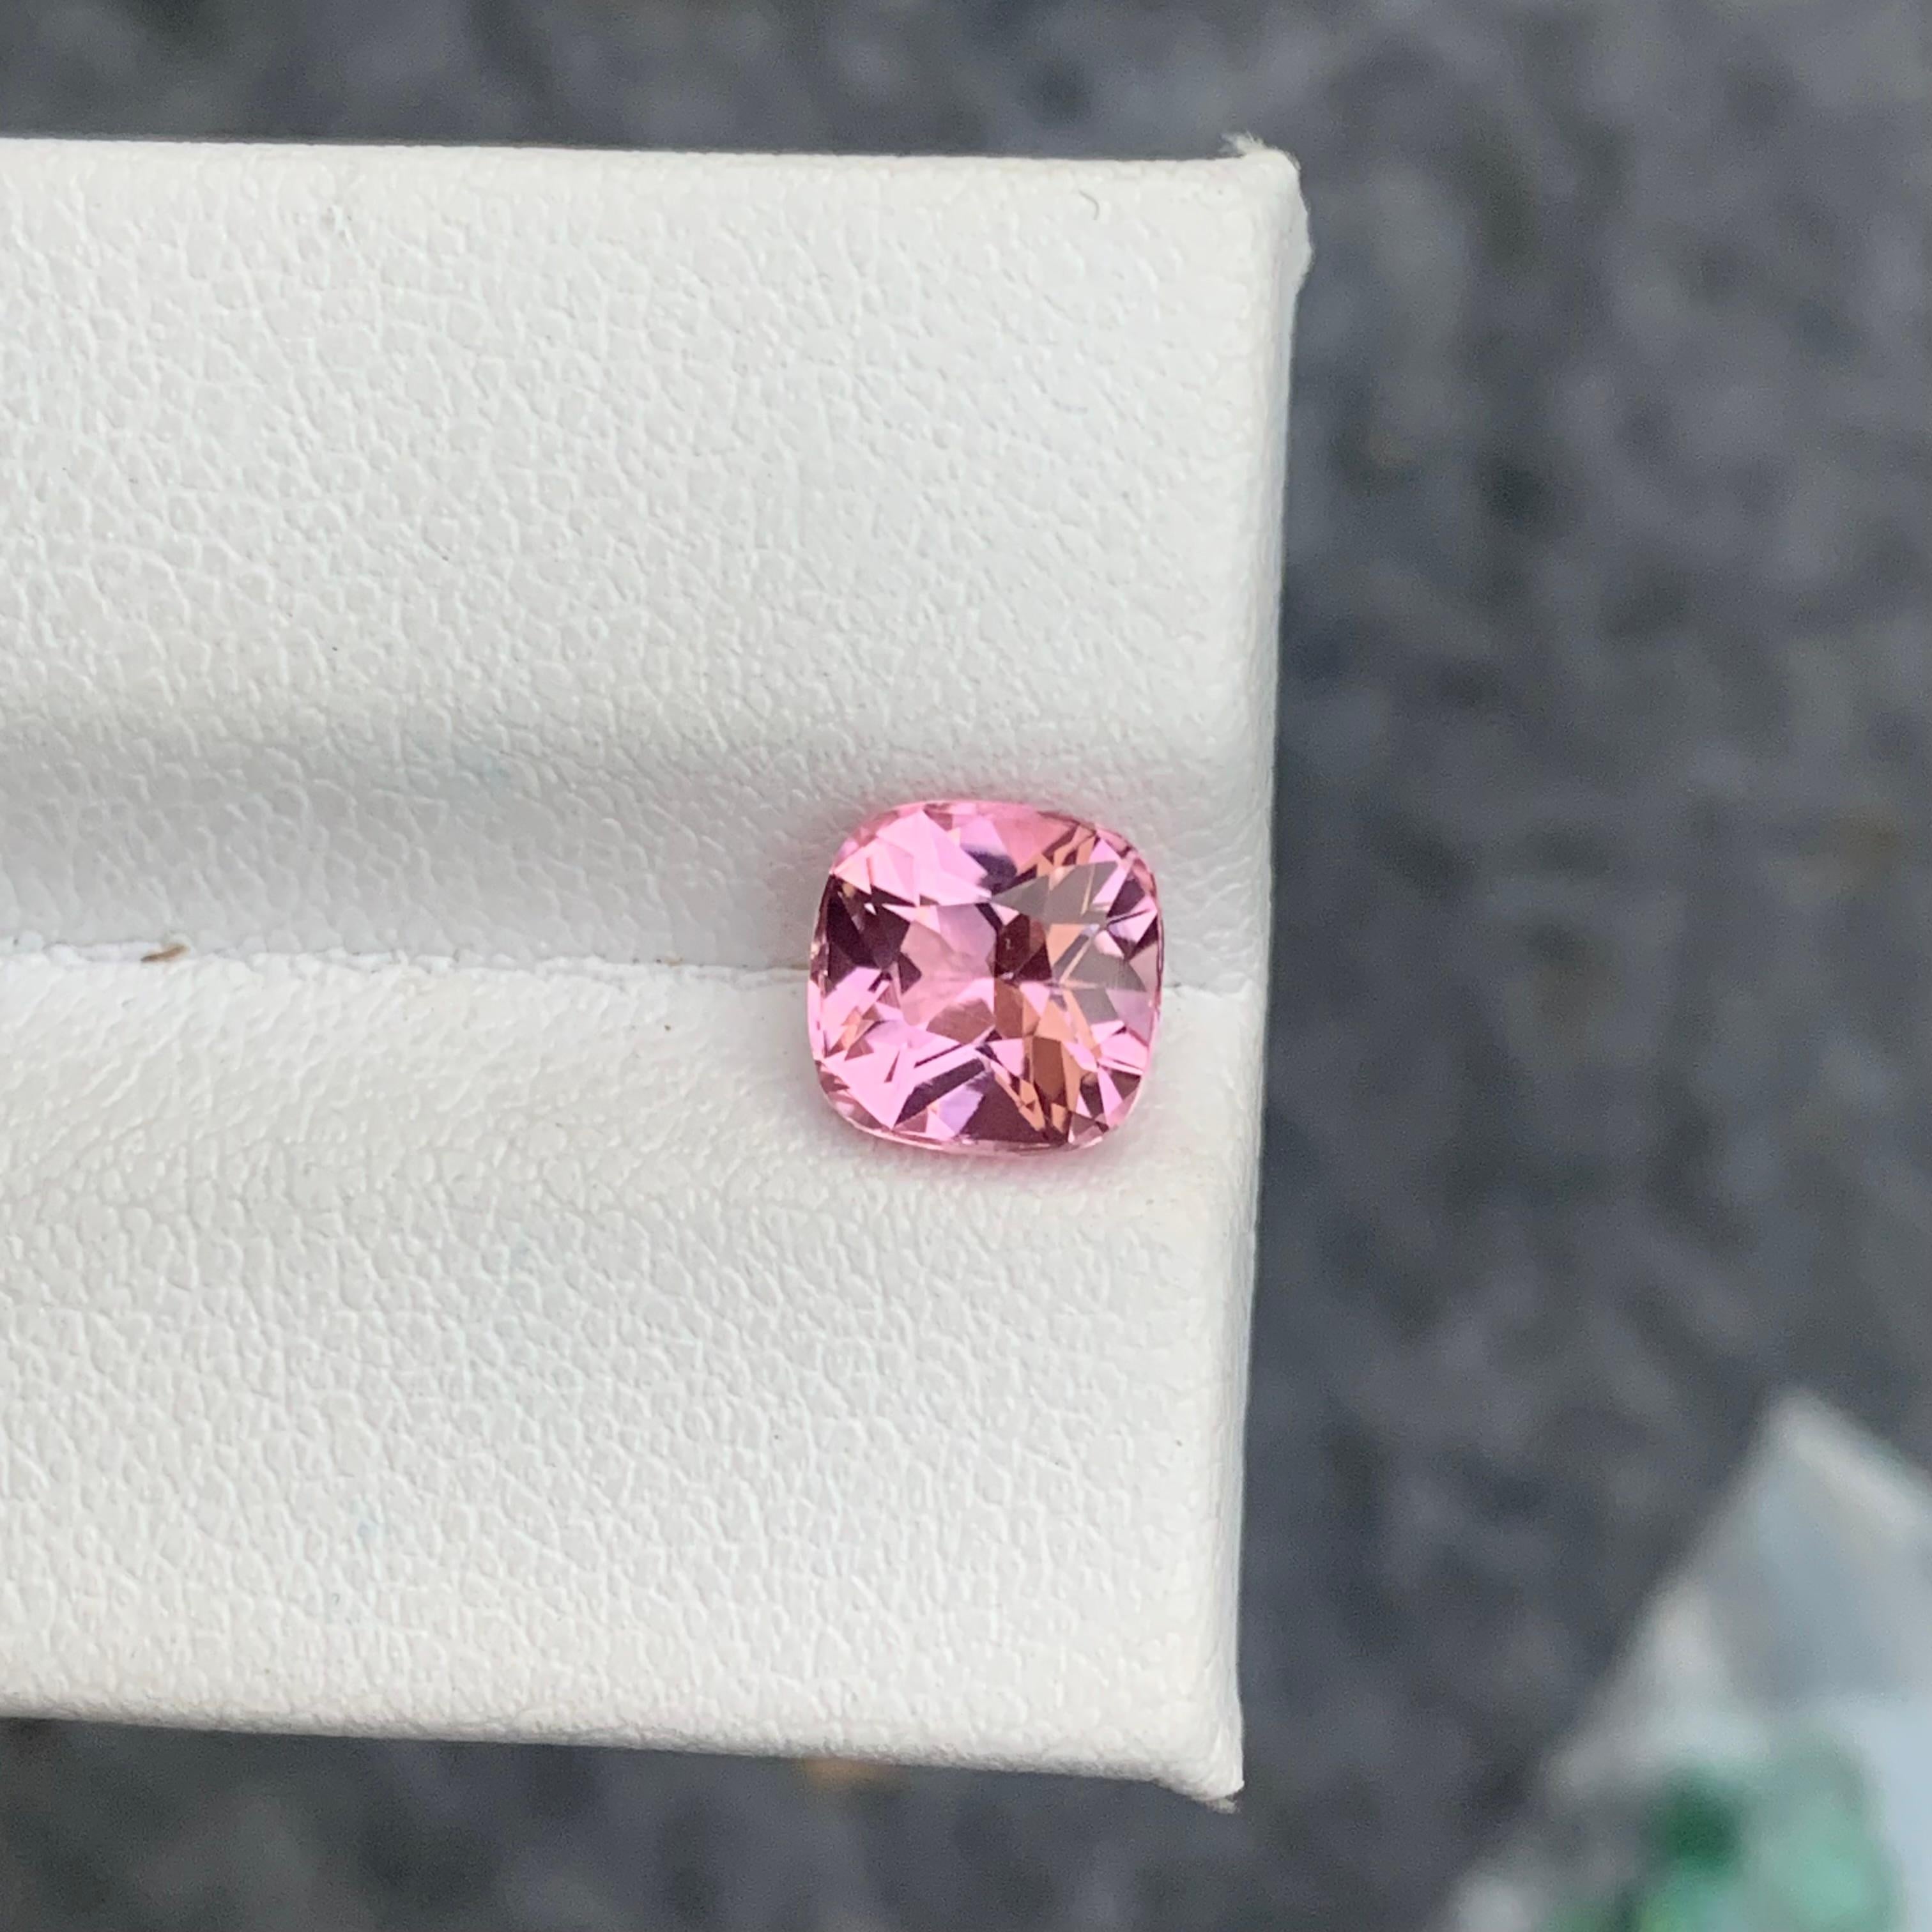 Exceptional 2.0 Carat Natural Loose Baby Pink Tourmaline from Afghan Mine For Sale 2